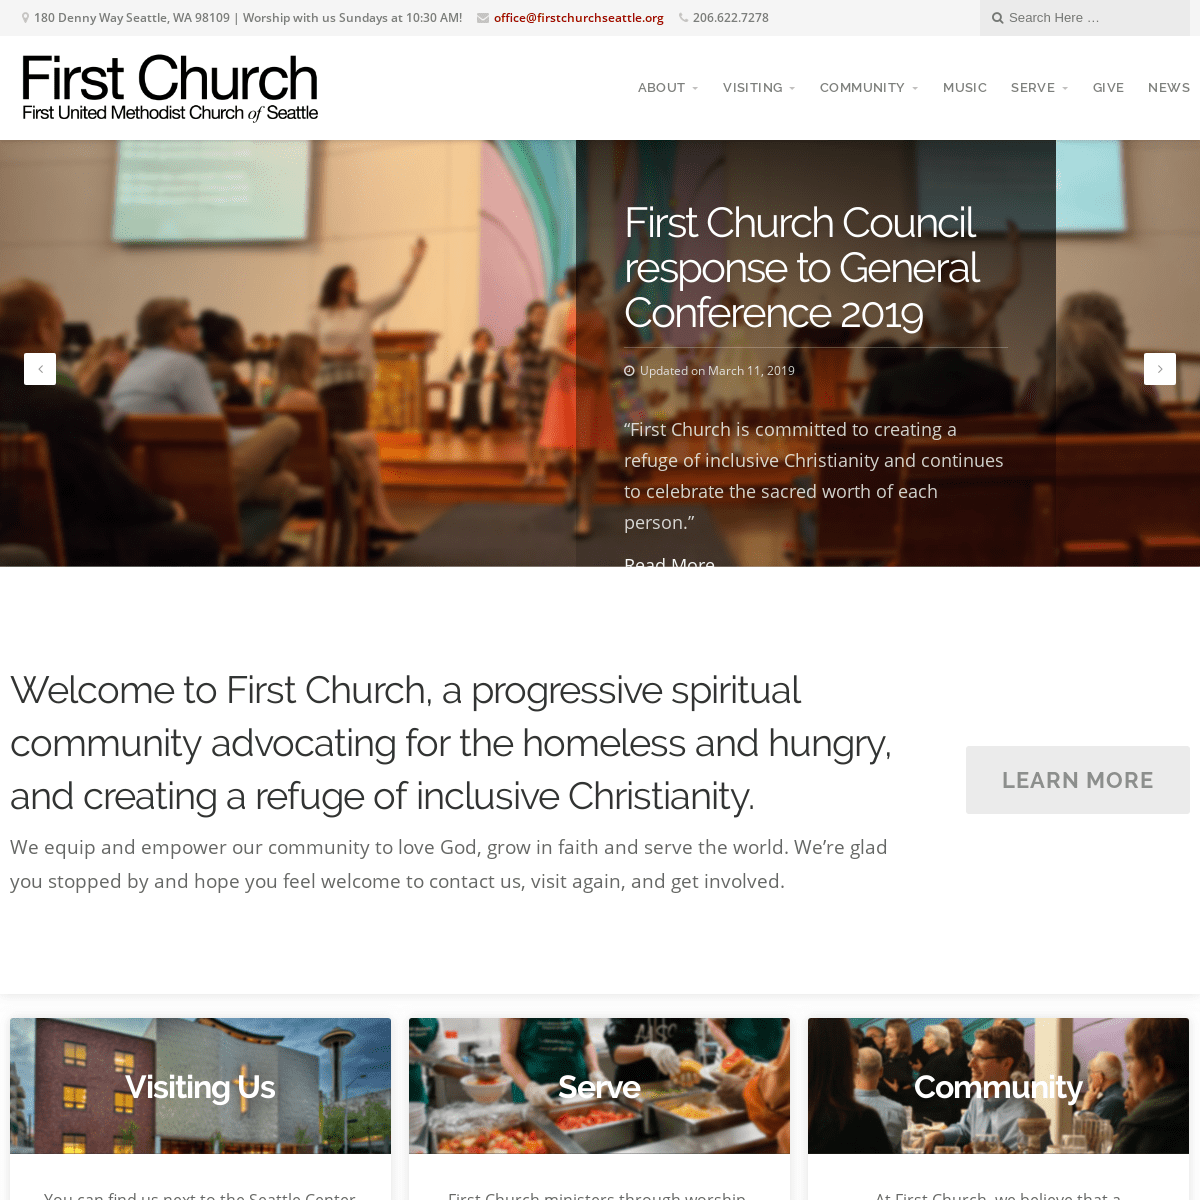 A complete backup of firstchurchseattle.org